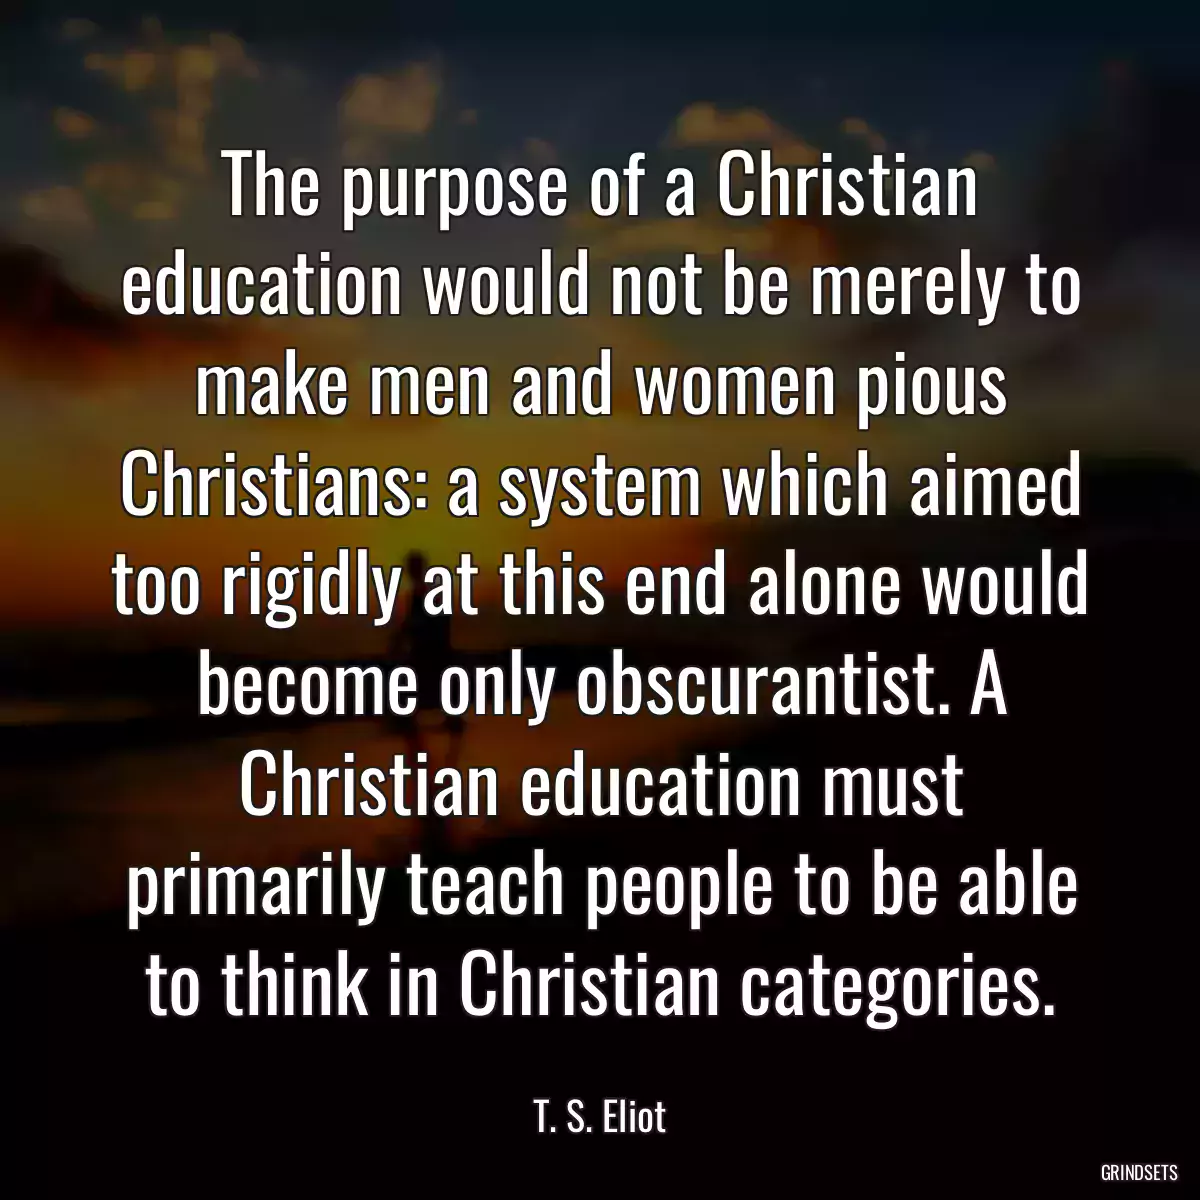 The purpose of a Christian education would not be merely to make men and women pious Christians: a system which aimed too rigidly at this end alone would become only obscurantist. A Christian education must primarily teach people to be able to think in Christian categories.